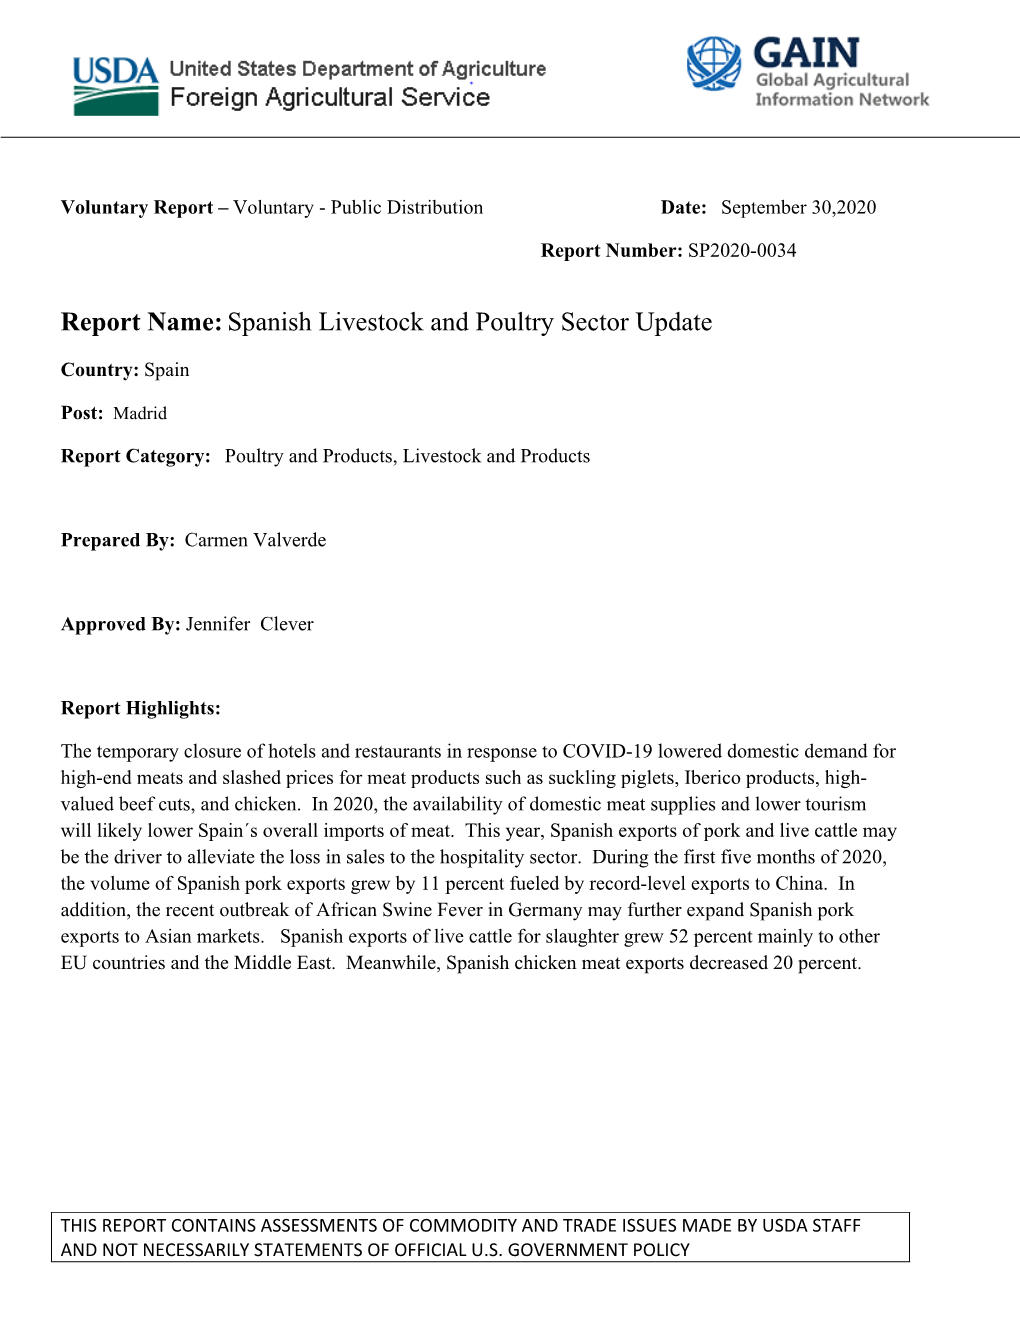 Report Name:Spanish Livestock and Poultry Sector Update